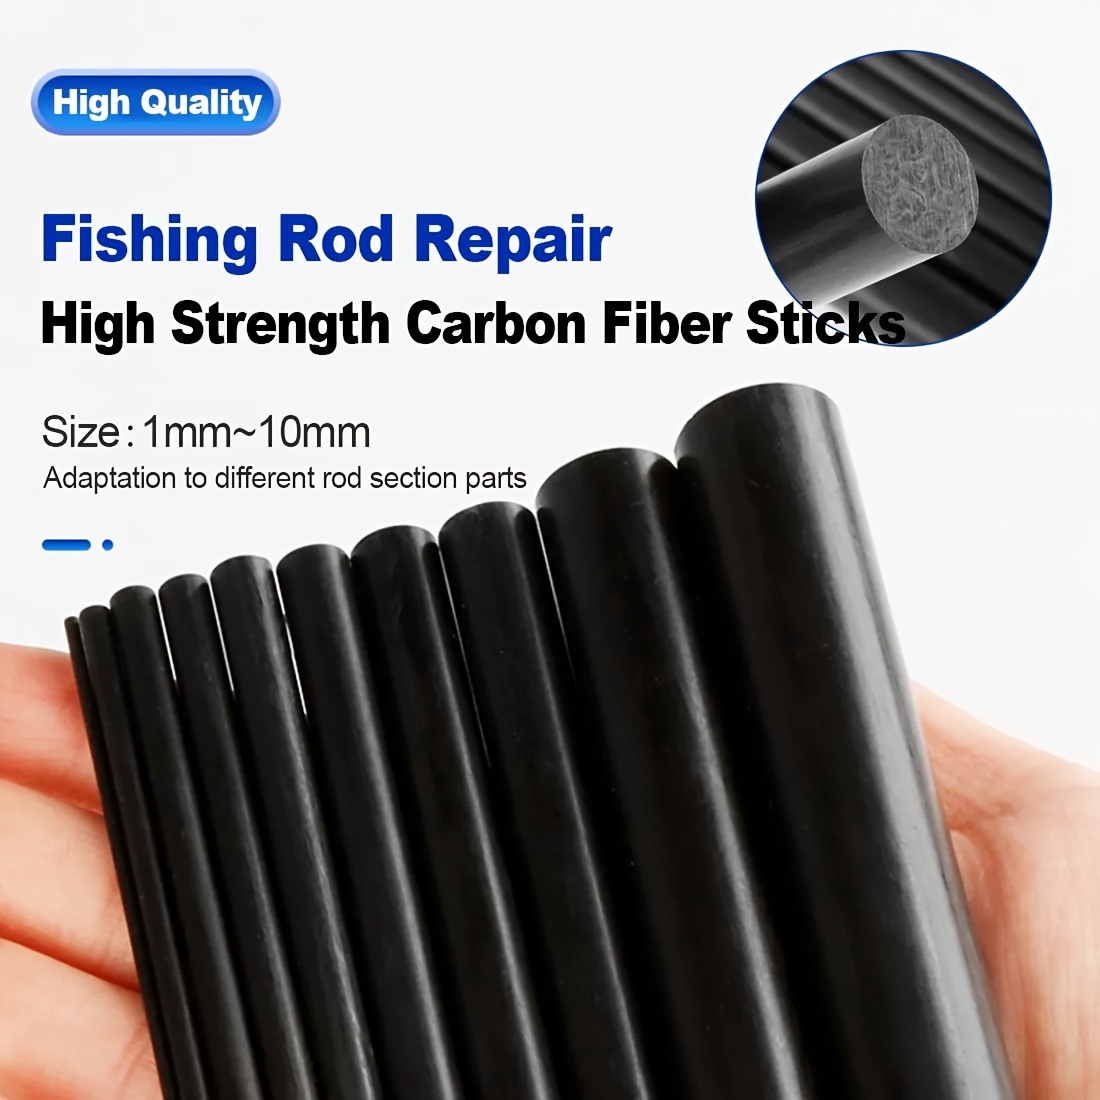 Carbon Fiber Fishing Rod Repair Kit Replace Old Parts Easy to Use and  Install